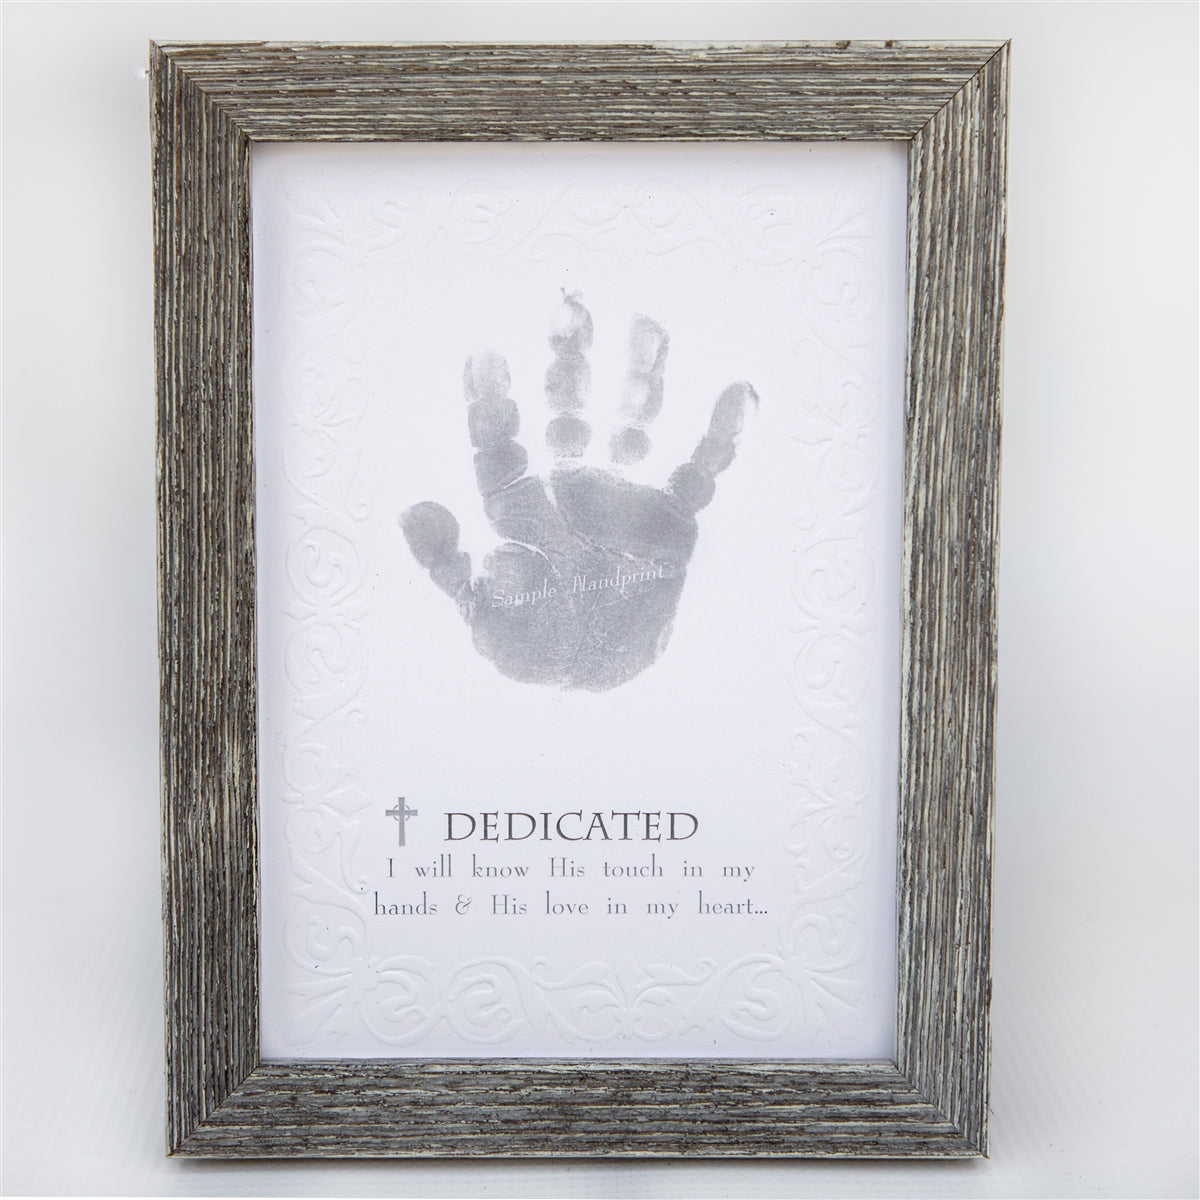 5x7 farmhouse frame with "Dedicated" Sentiment on embossed cardstock with space for a child's handprint.